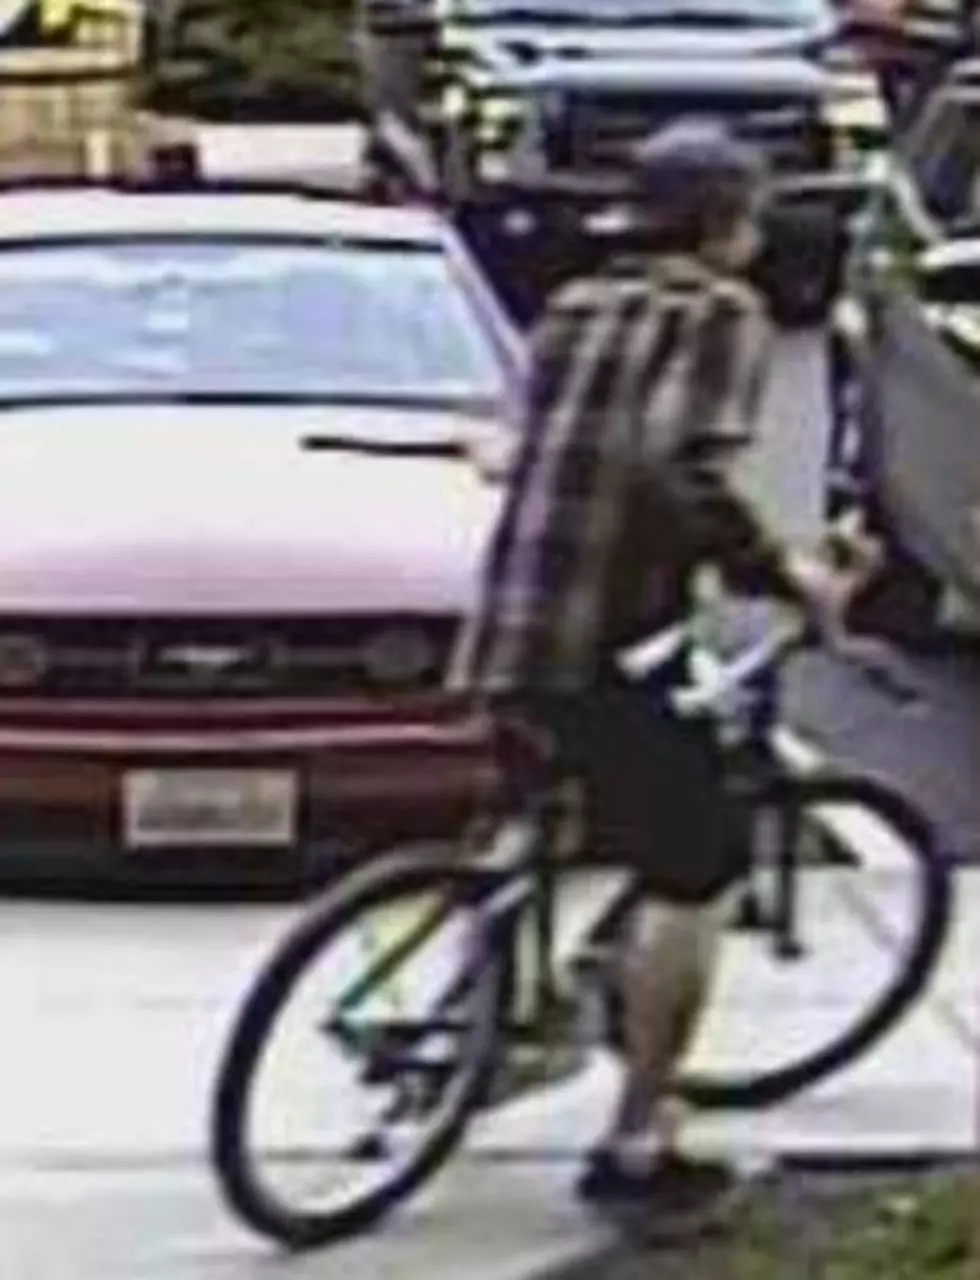 Update: Police Take Man Into Custody After Bike Theft Photos Published